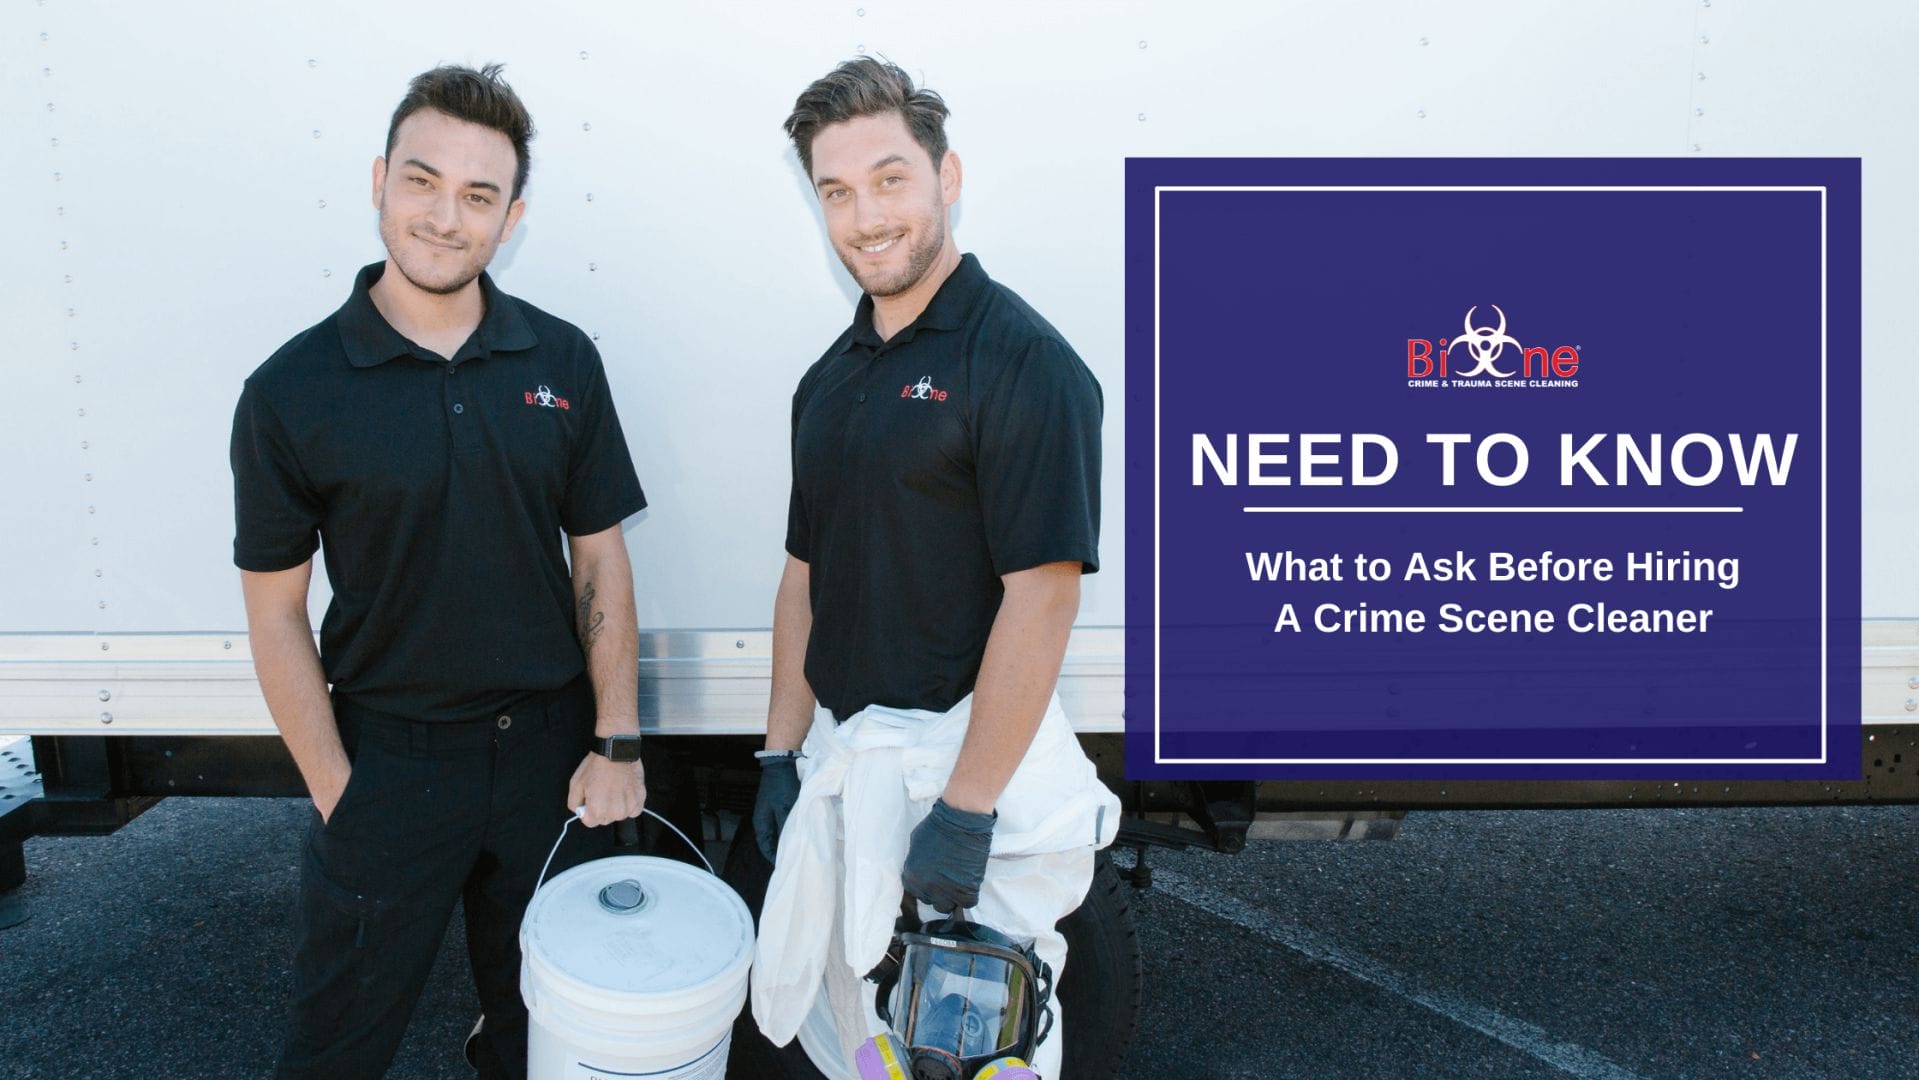 Bio-One What to Ask Before Hiring a Crime Scene Cleaner